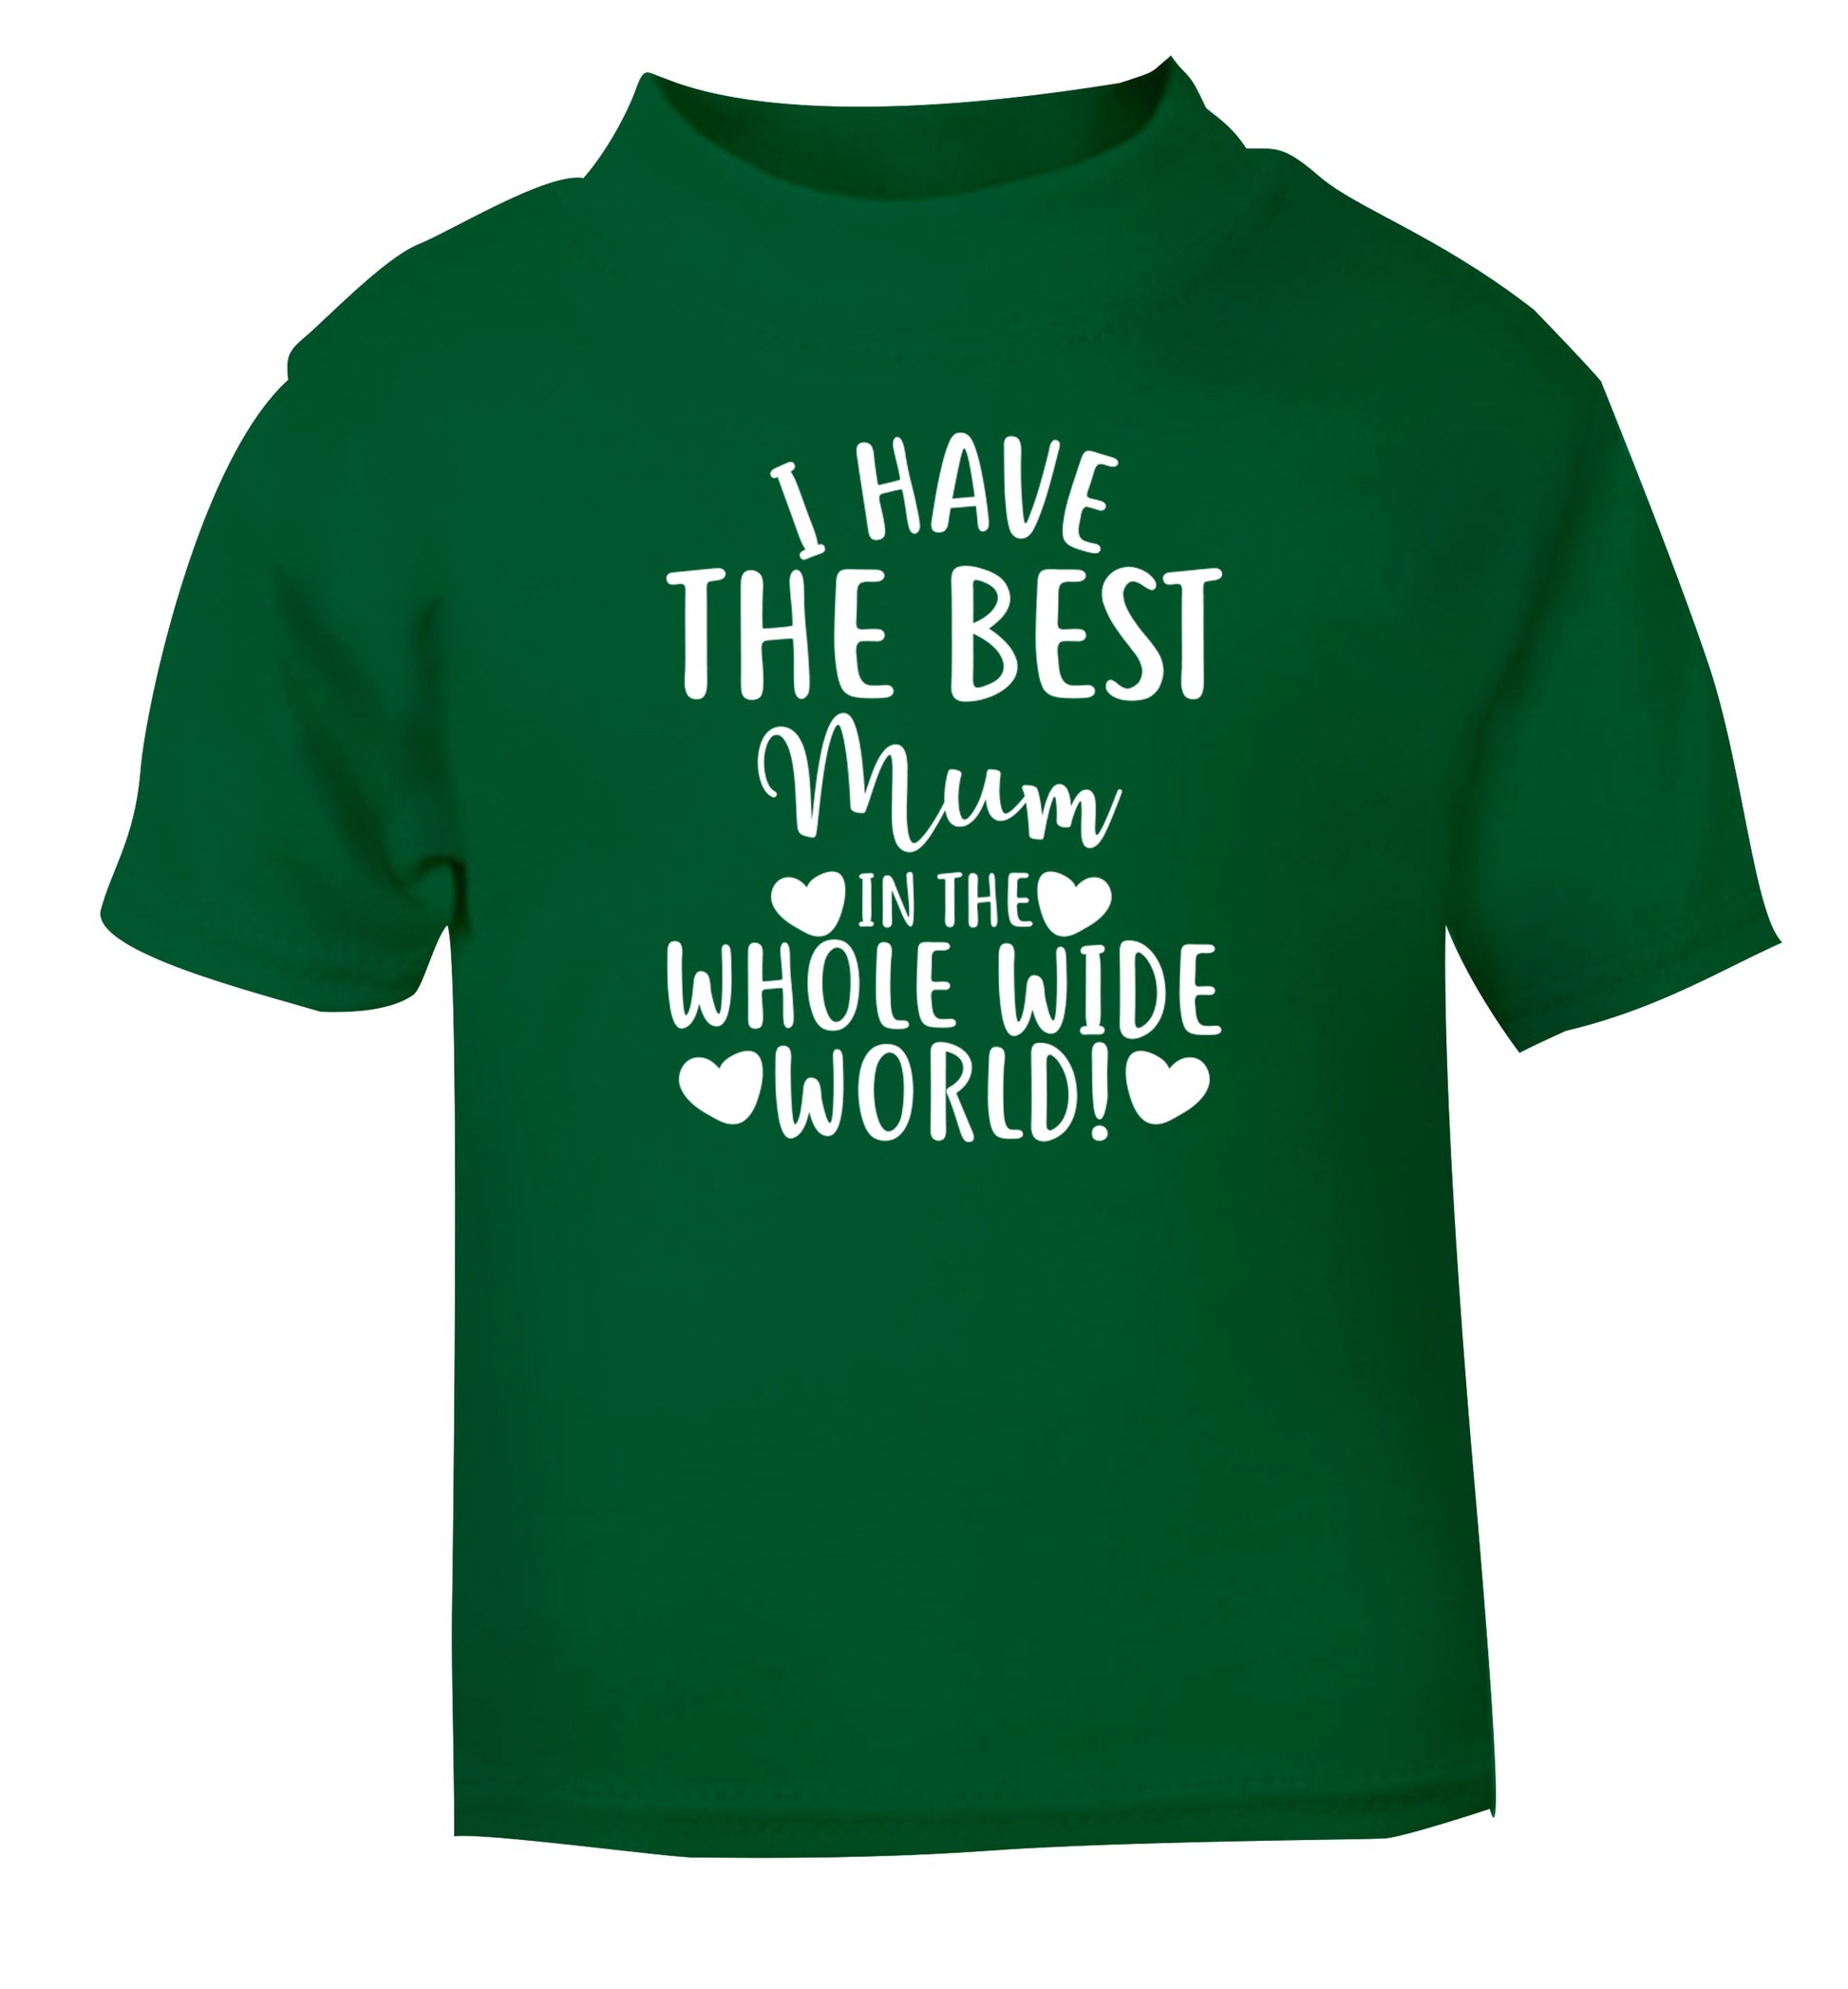 I have the best mum in the whole wide world! green Baby Toddler Tshirt 2 Years